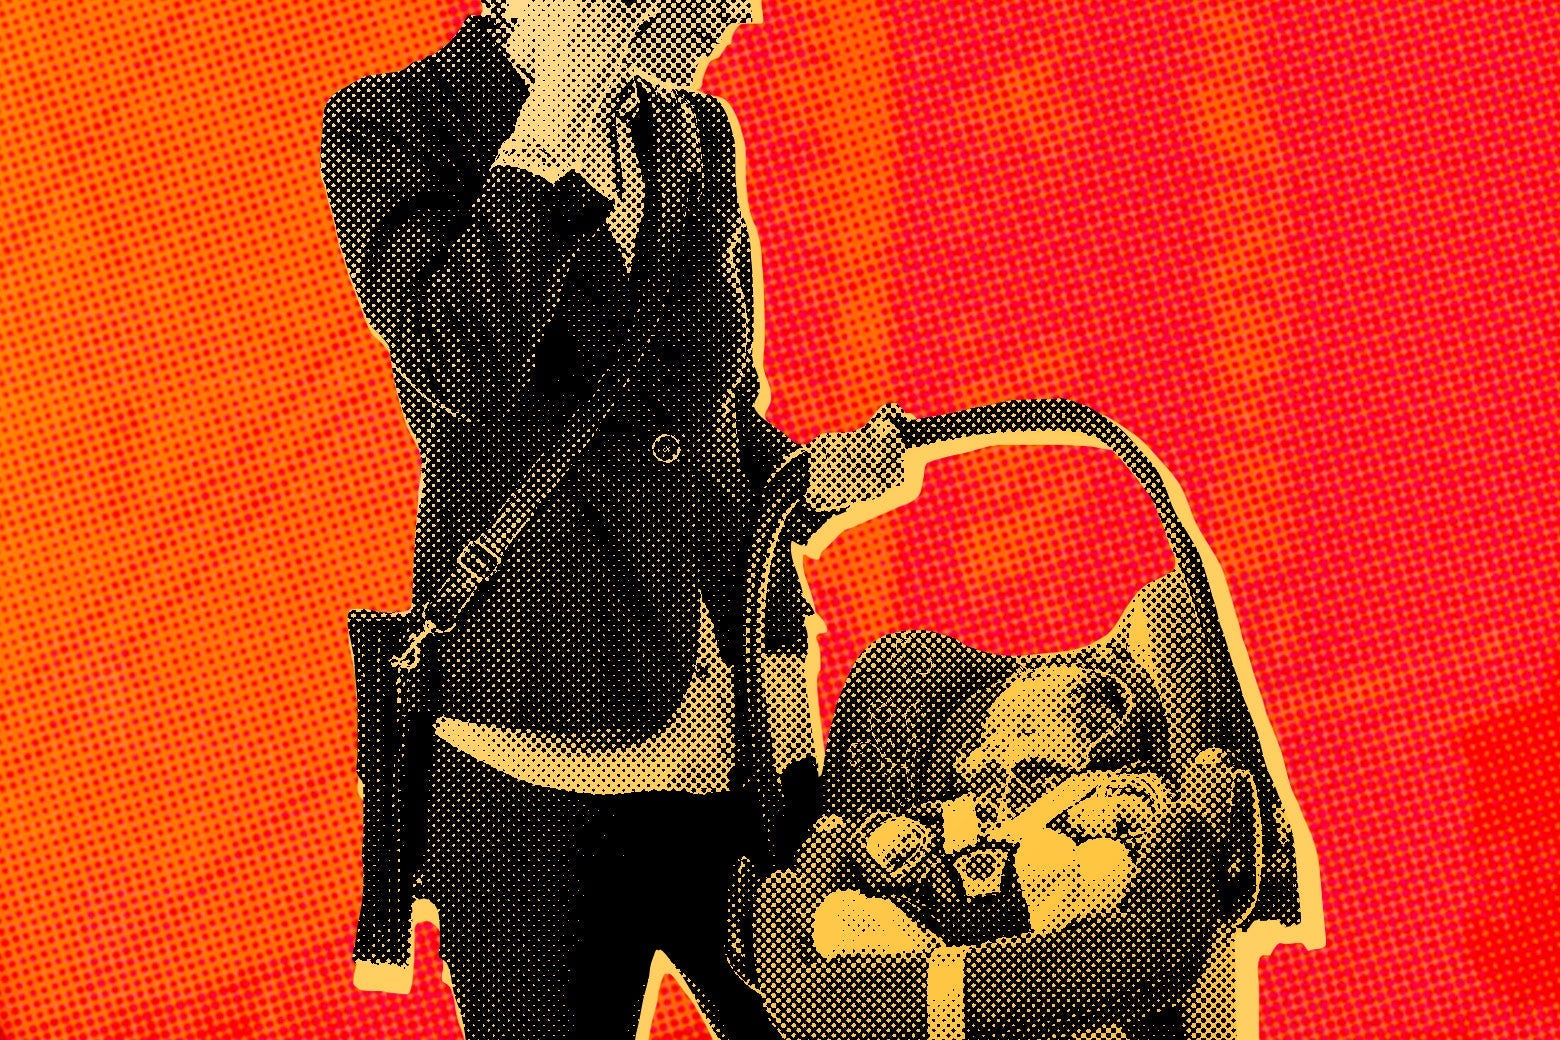 Photo illustration of a busy parent, dressed in business casual clothing, carrying a child while talking on a cellphone.